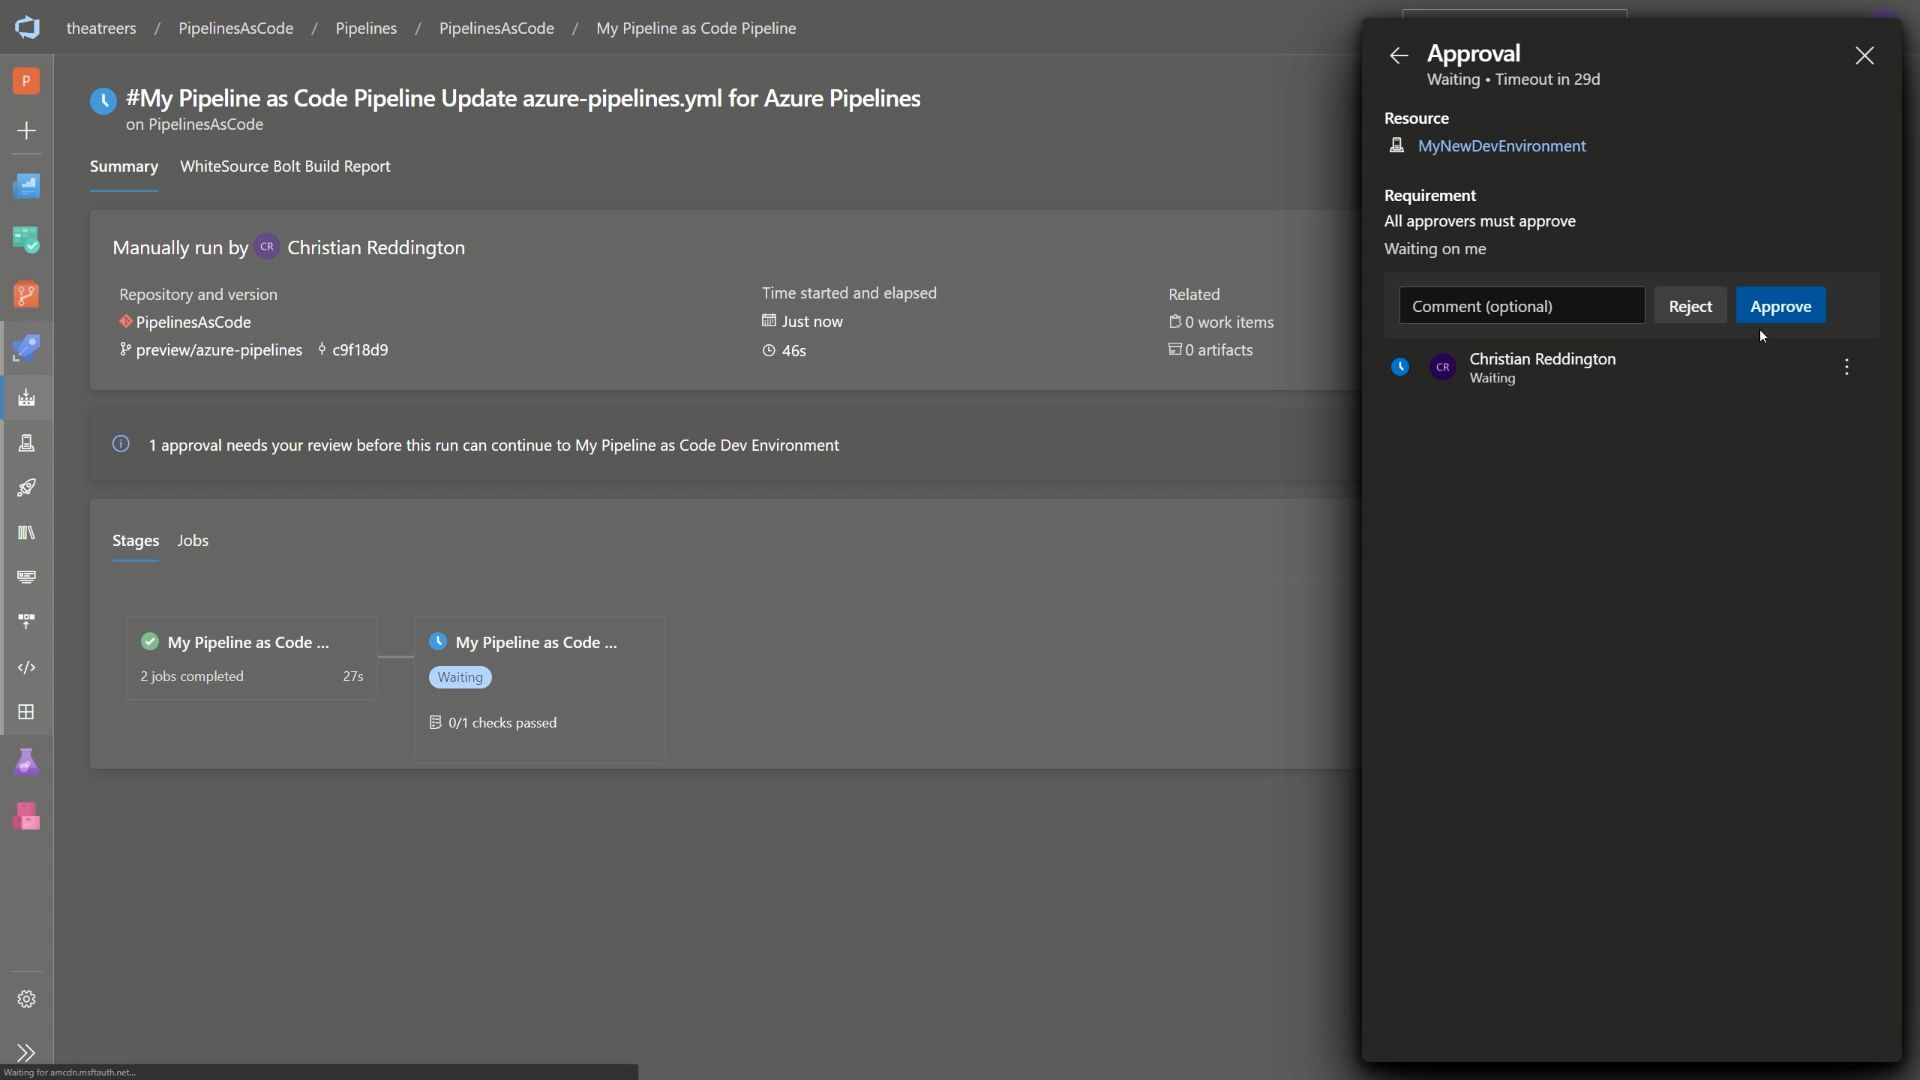 Screenshot showing the pending approval in our dev environment